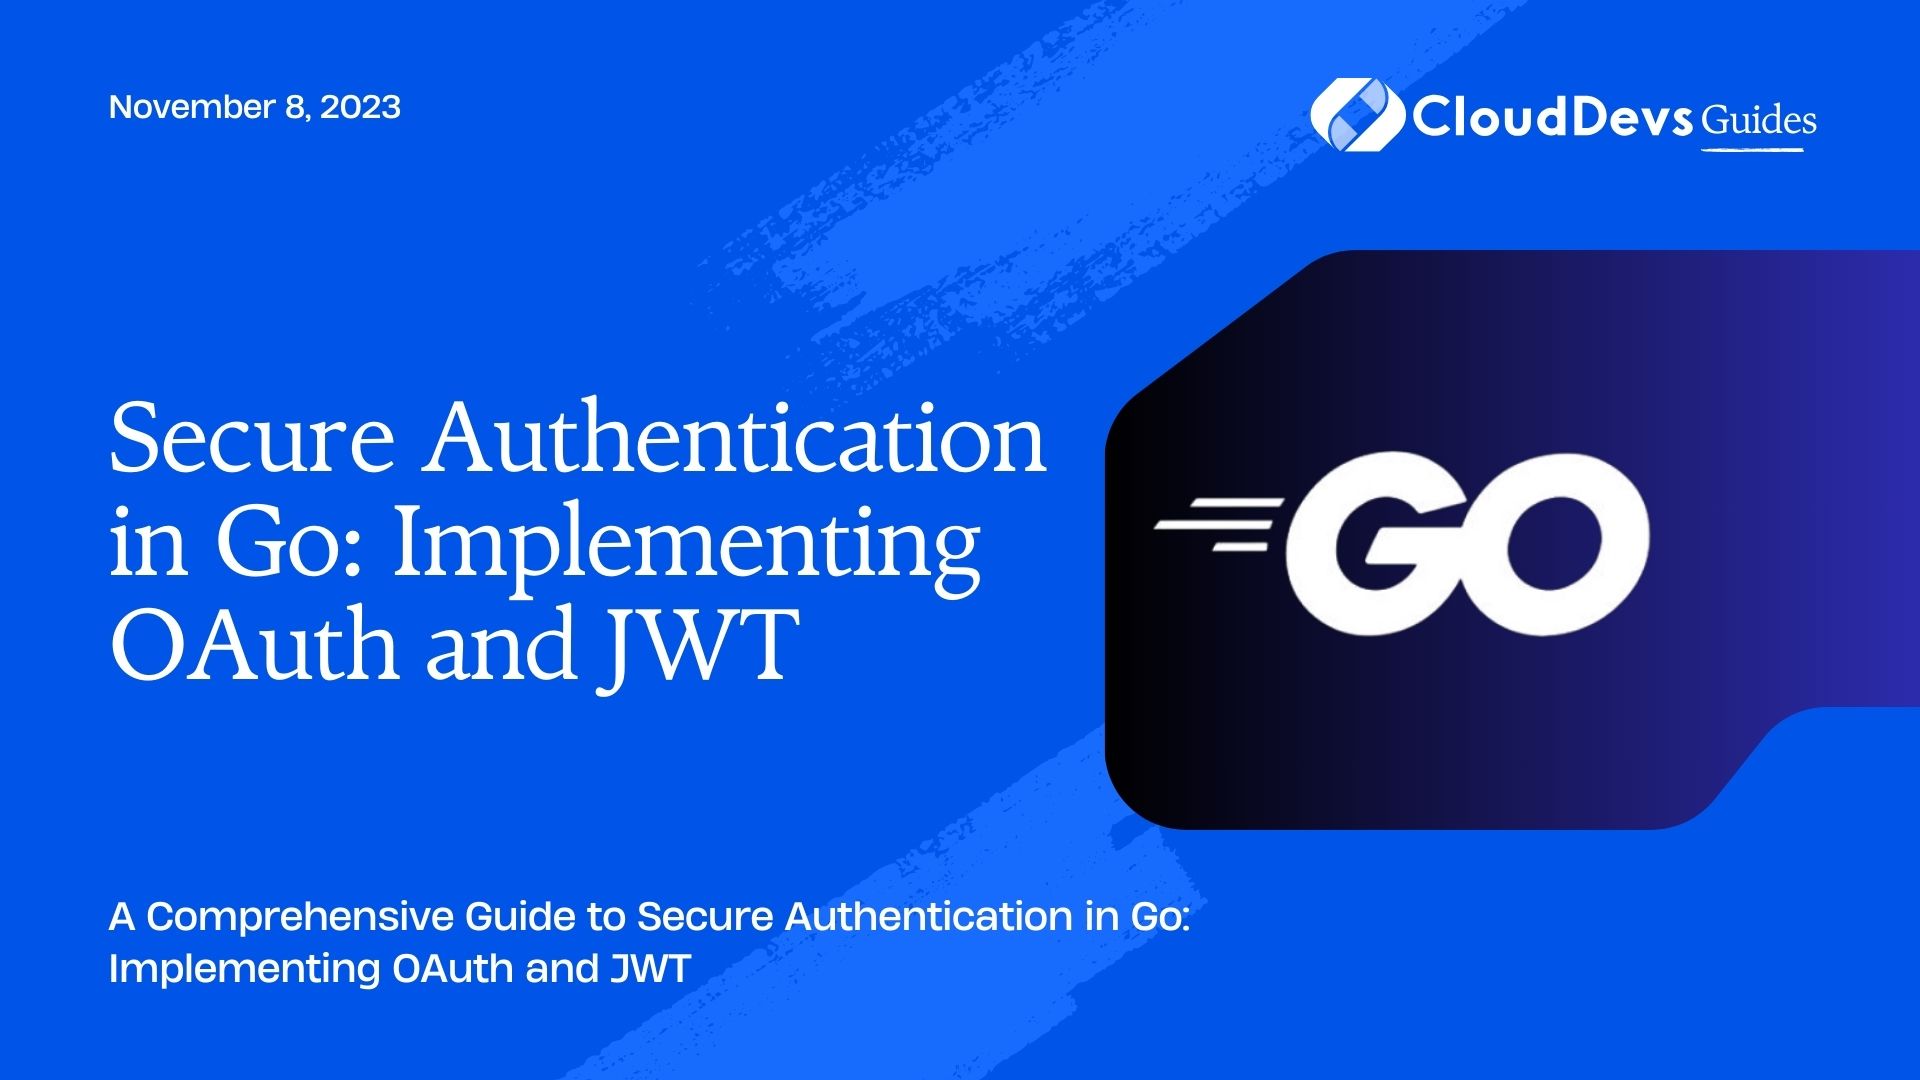 Secure Authentication in Go: Implementing OAuth and JWT